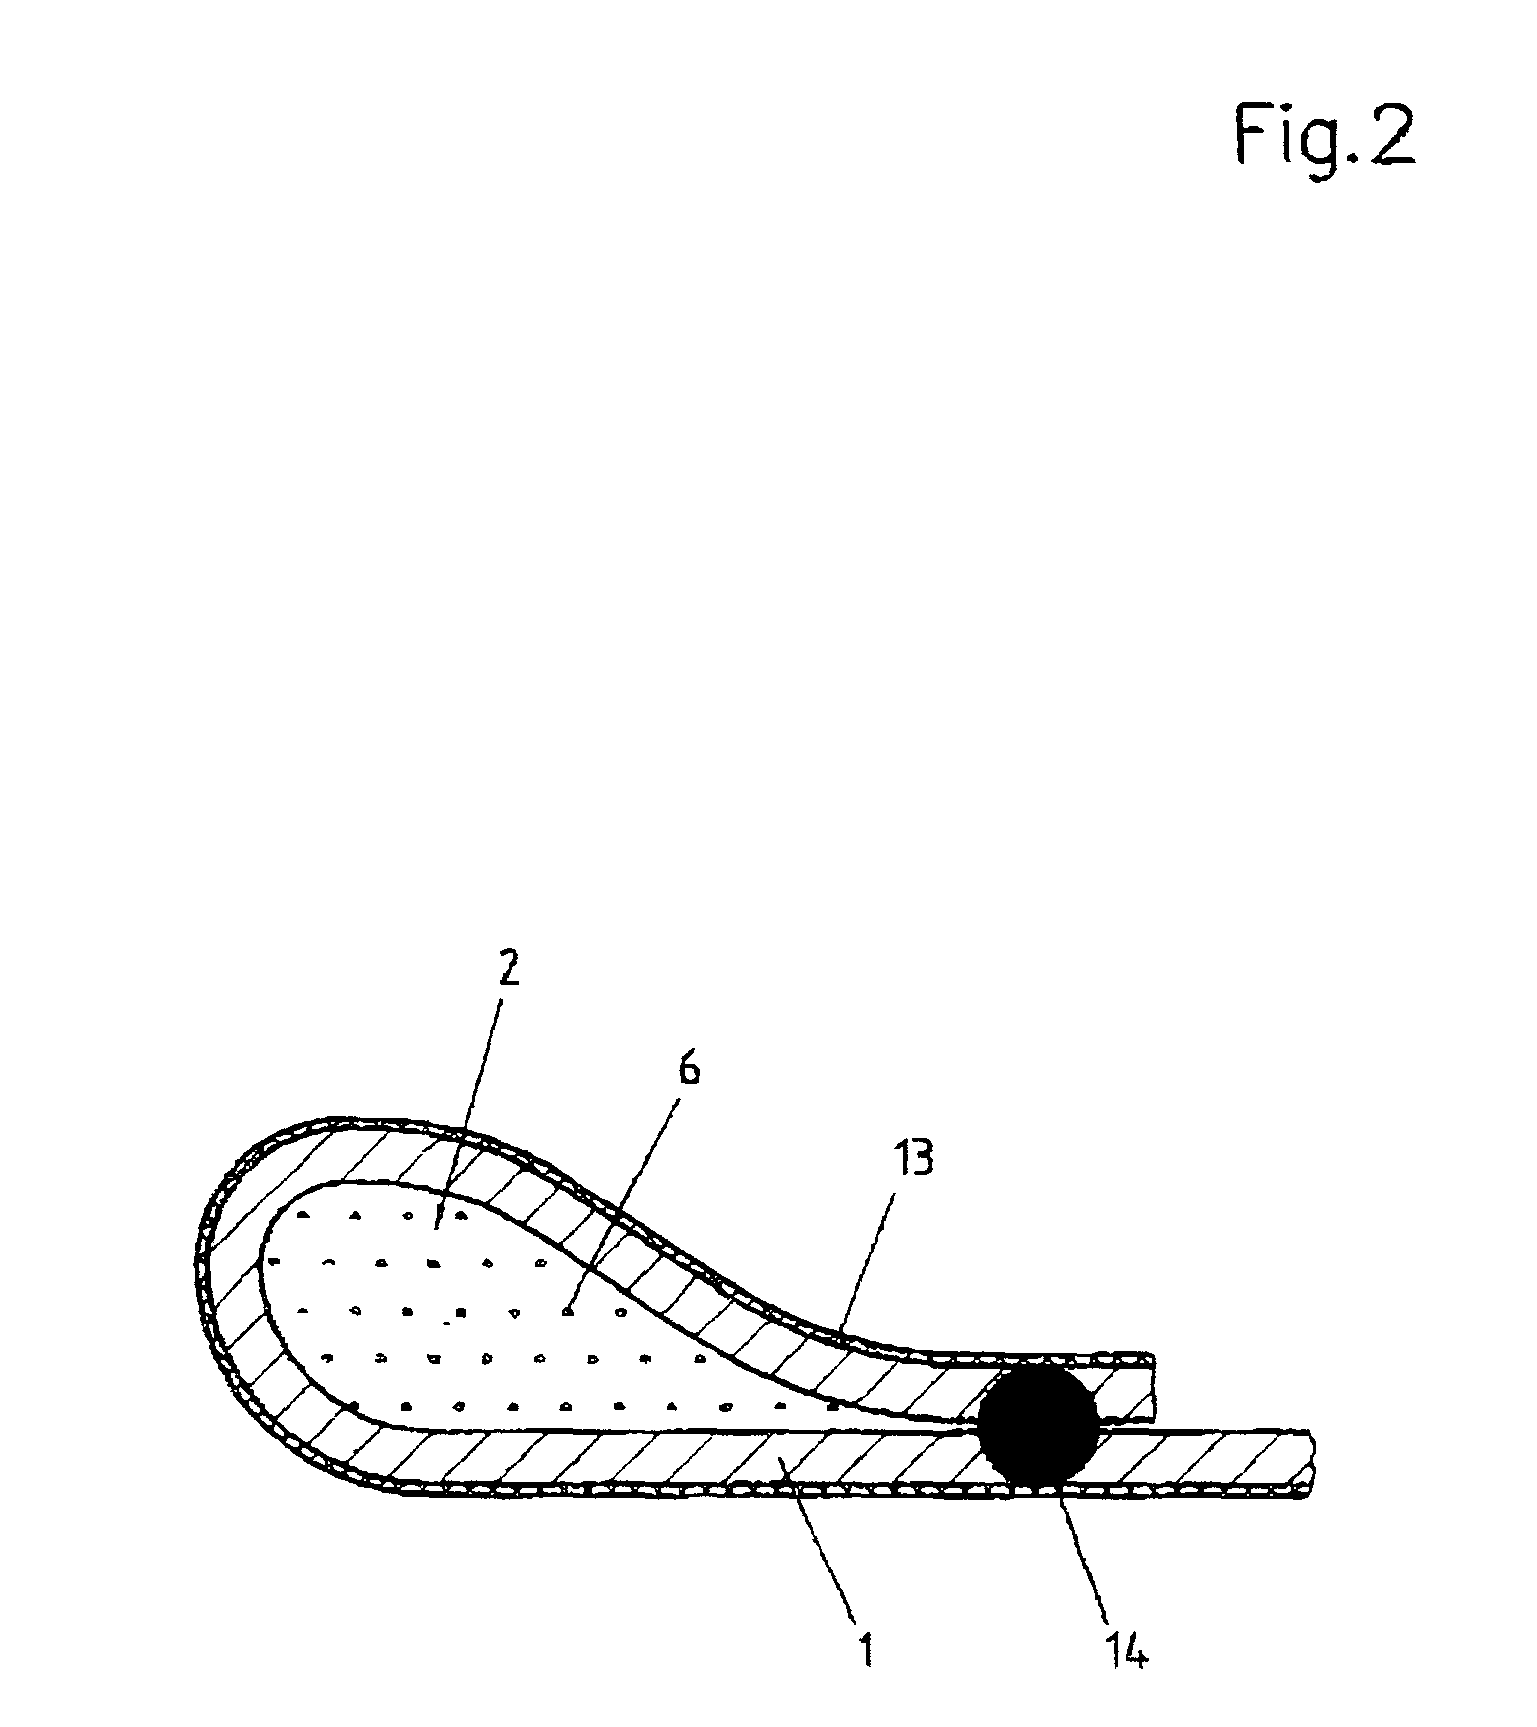 Flat gasket for a reciprocating engine or a driven machine